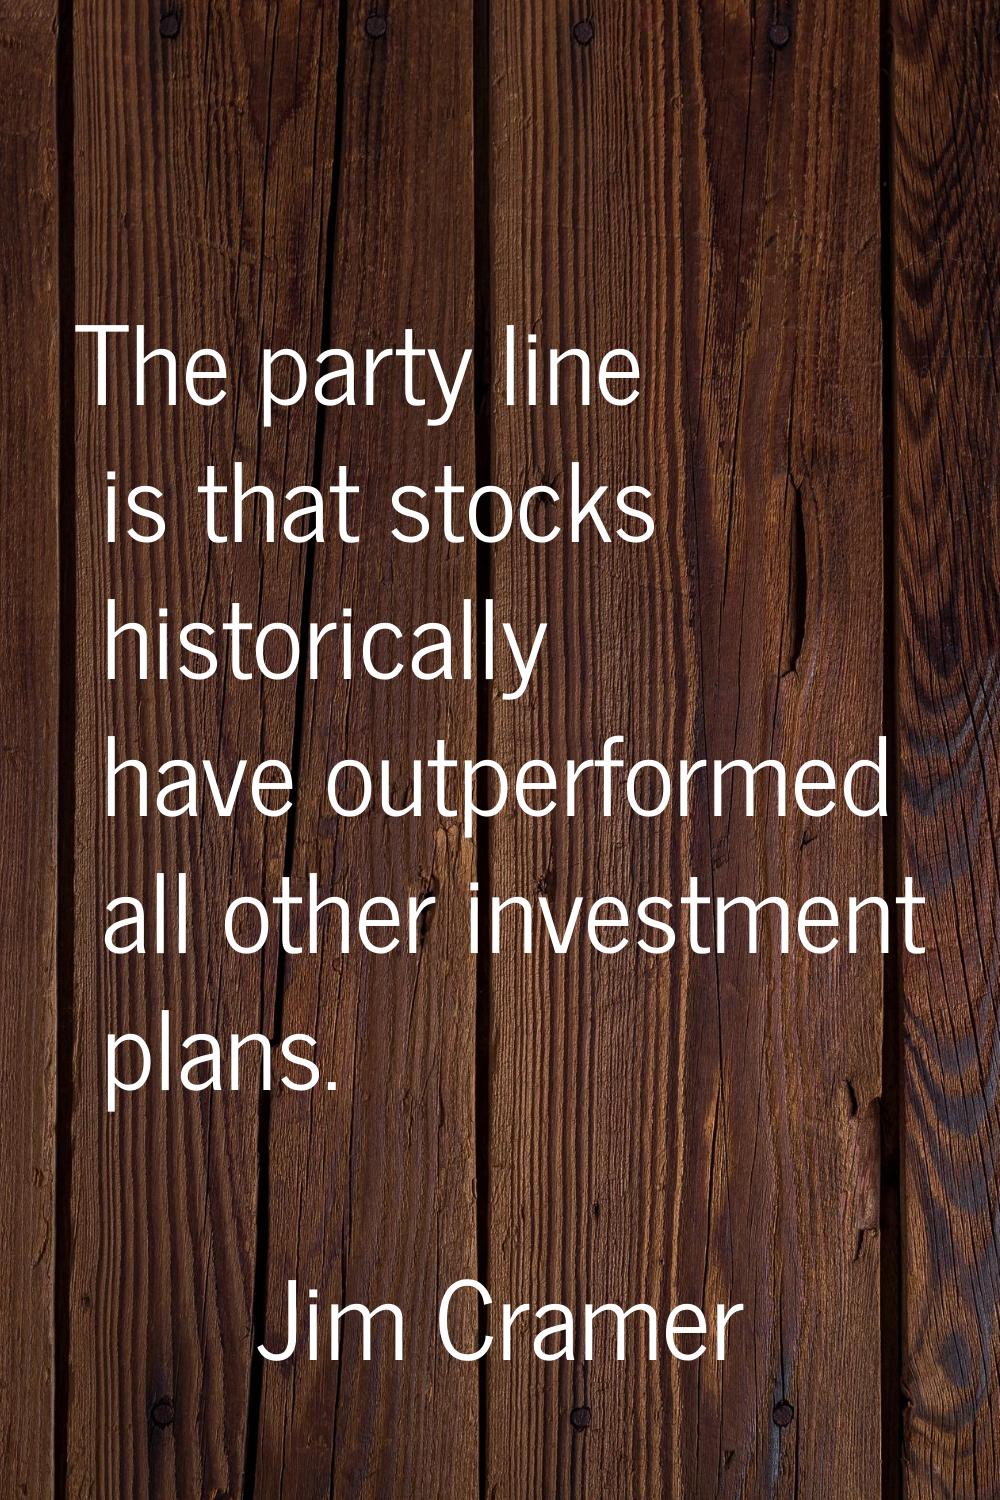 The party line is that stocks historically have outperformed all other investment plans.